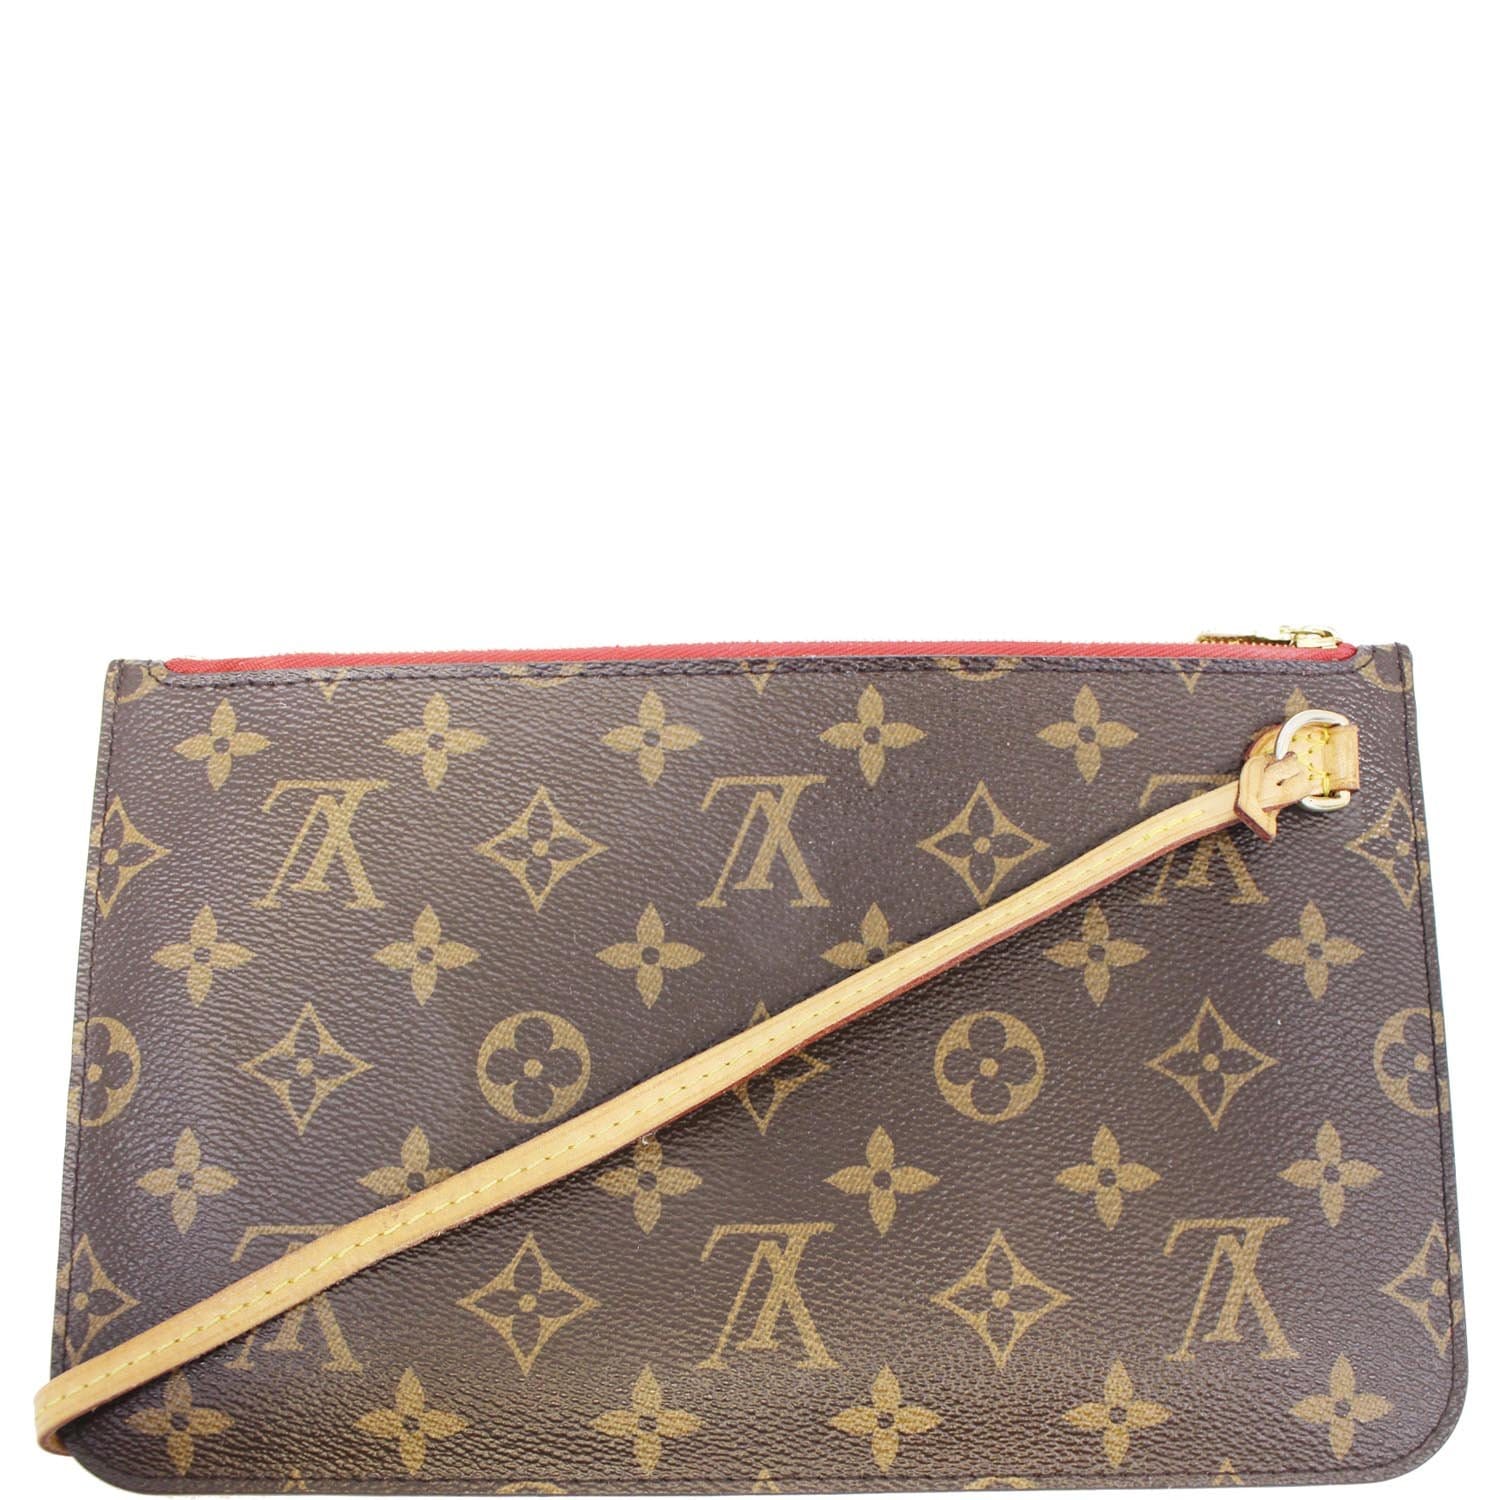 Memes Treasures Sales and Authentication Service - Just in! New arrival. Louis  Vuitton Bleu Denim Epi Neverfull MM w/ Wristlet Pouch   neverfull-mm-w-wristlet-pouch/